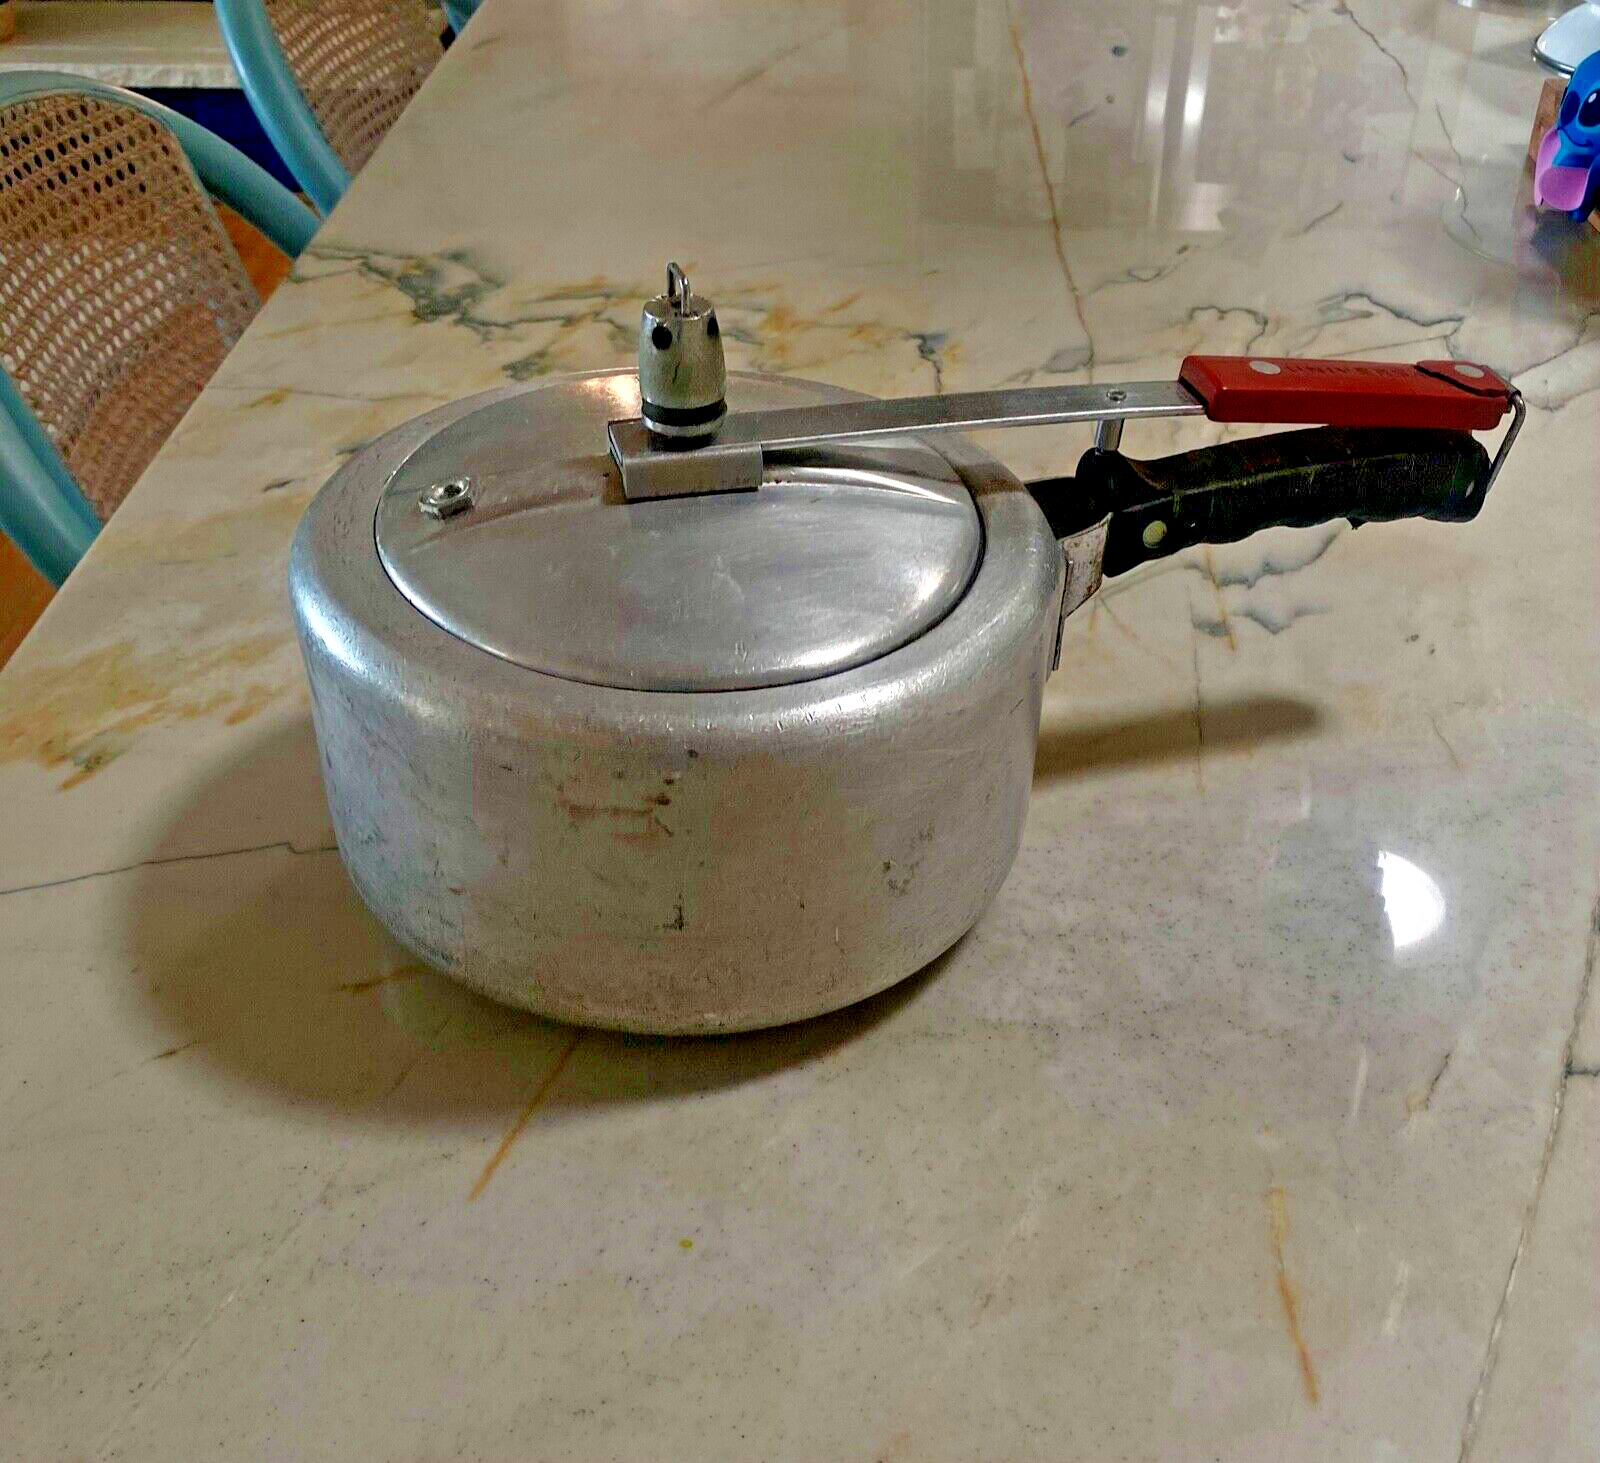 Vintage Pressure Cooker from the 1940s or 1950s.